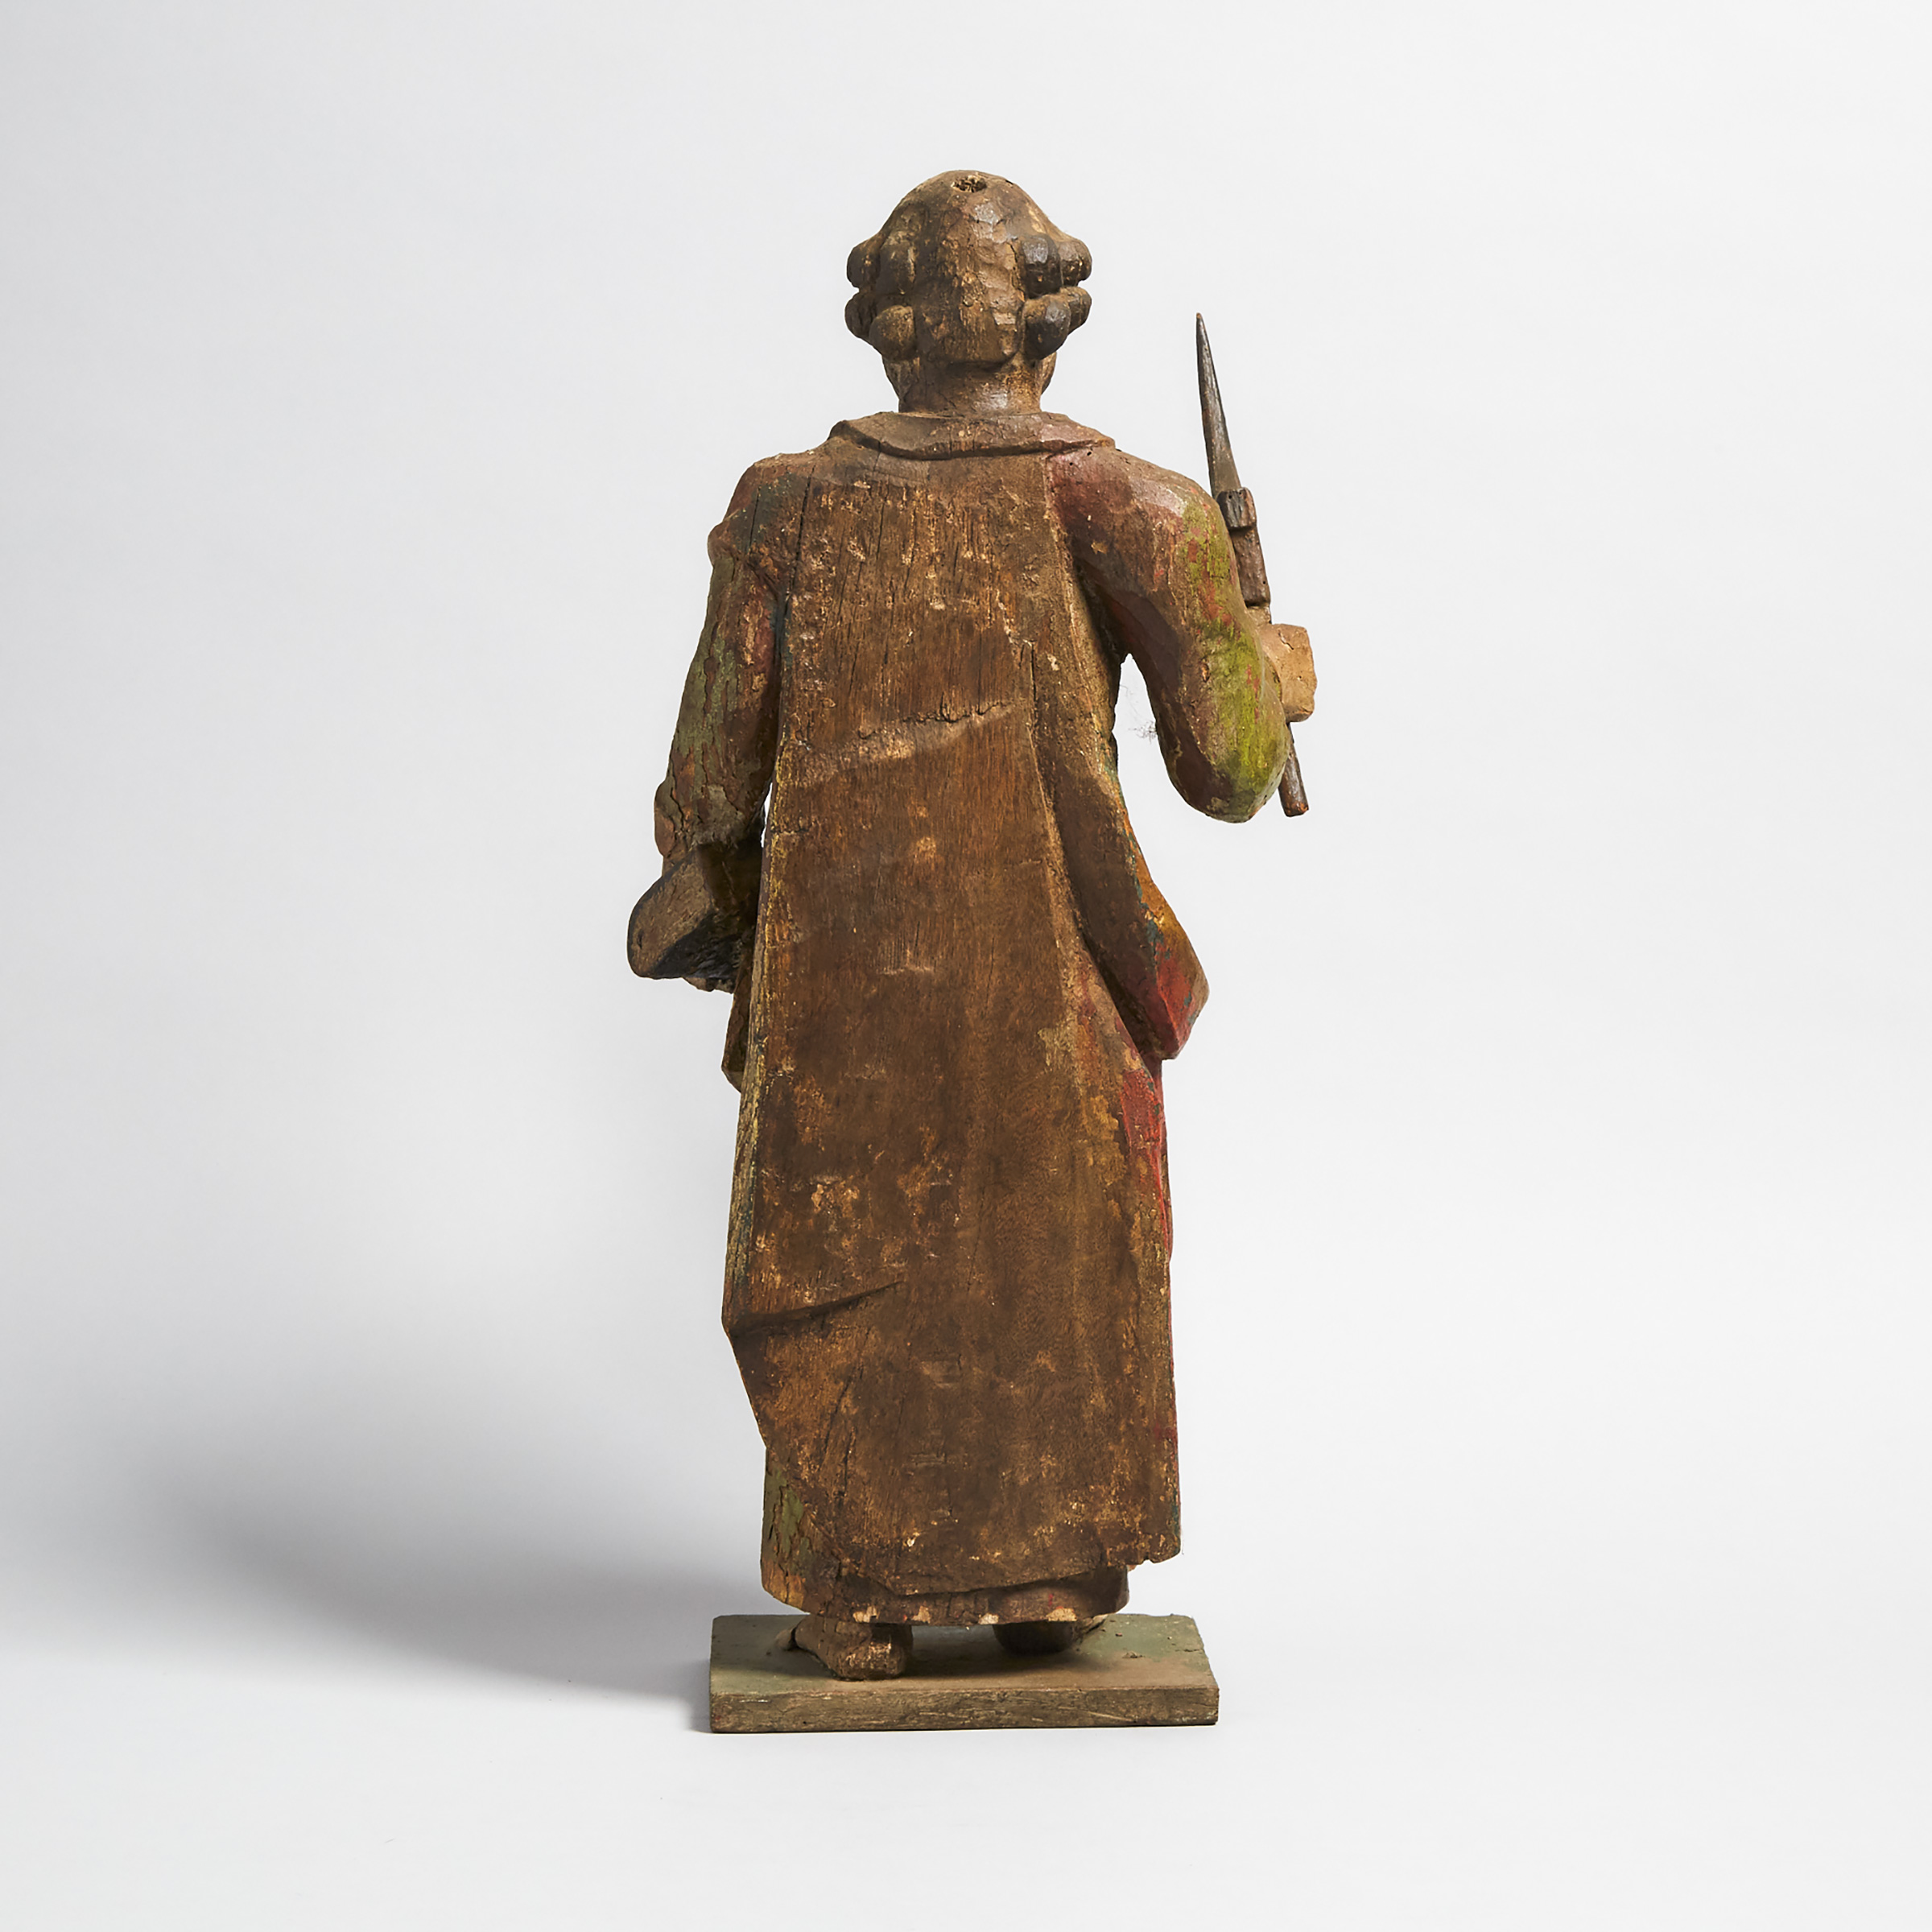 Portuguese Carved and Polychromed Wooden FIgure of St. Matthias, 19th century or earlier